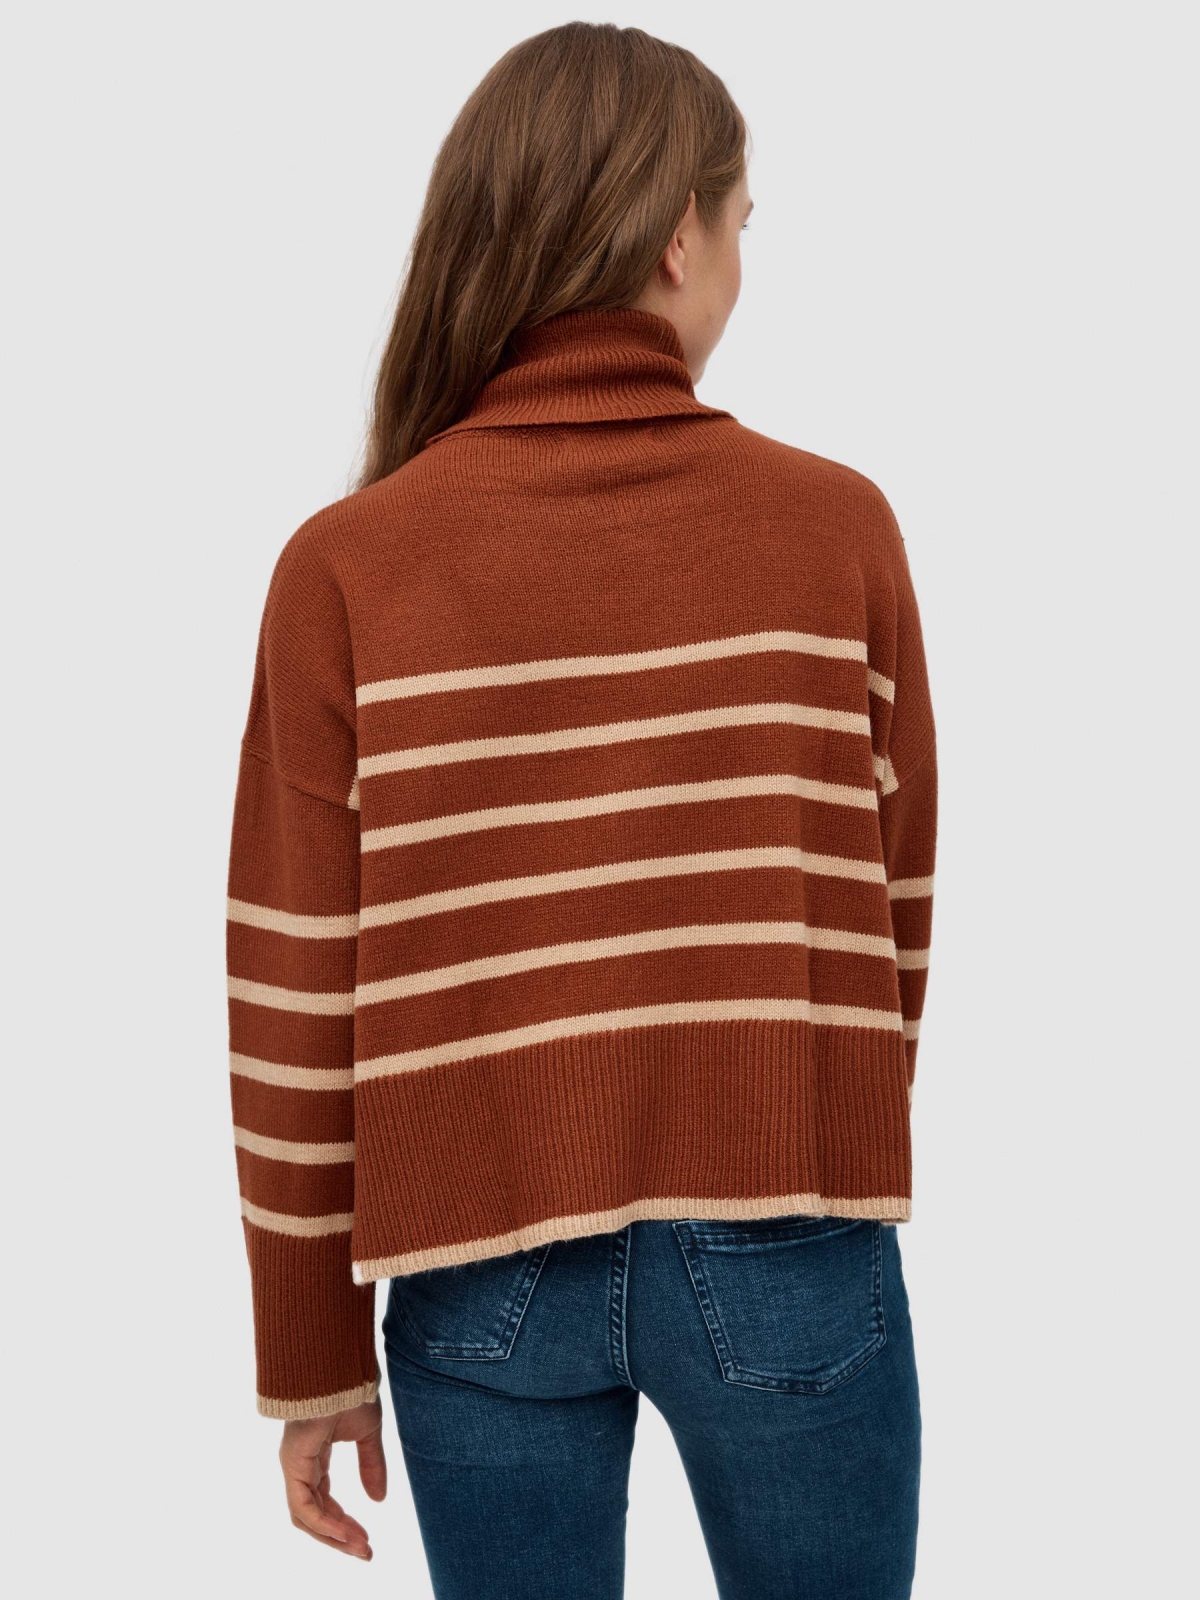 Turtleneck crop sweater brown middle back view